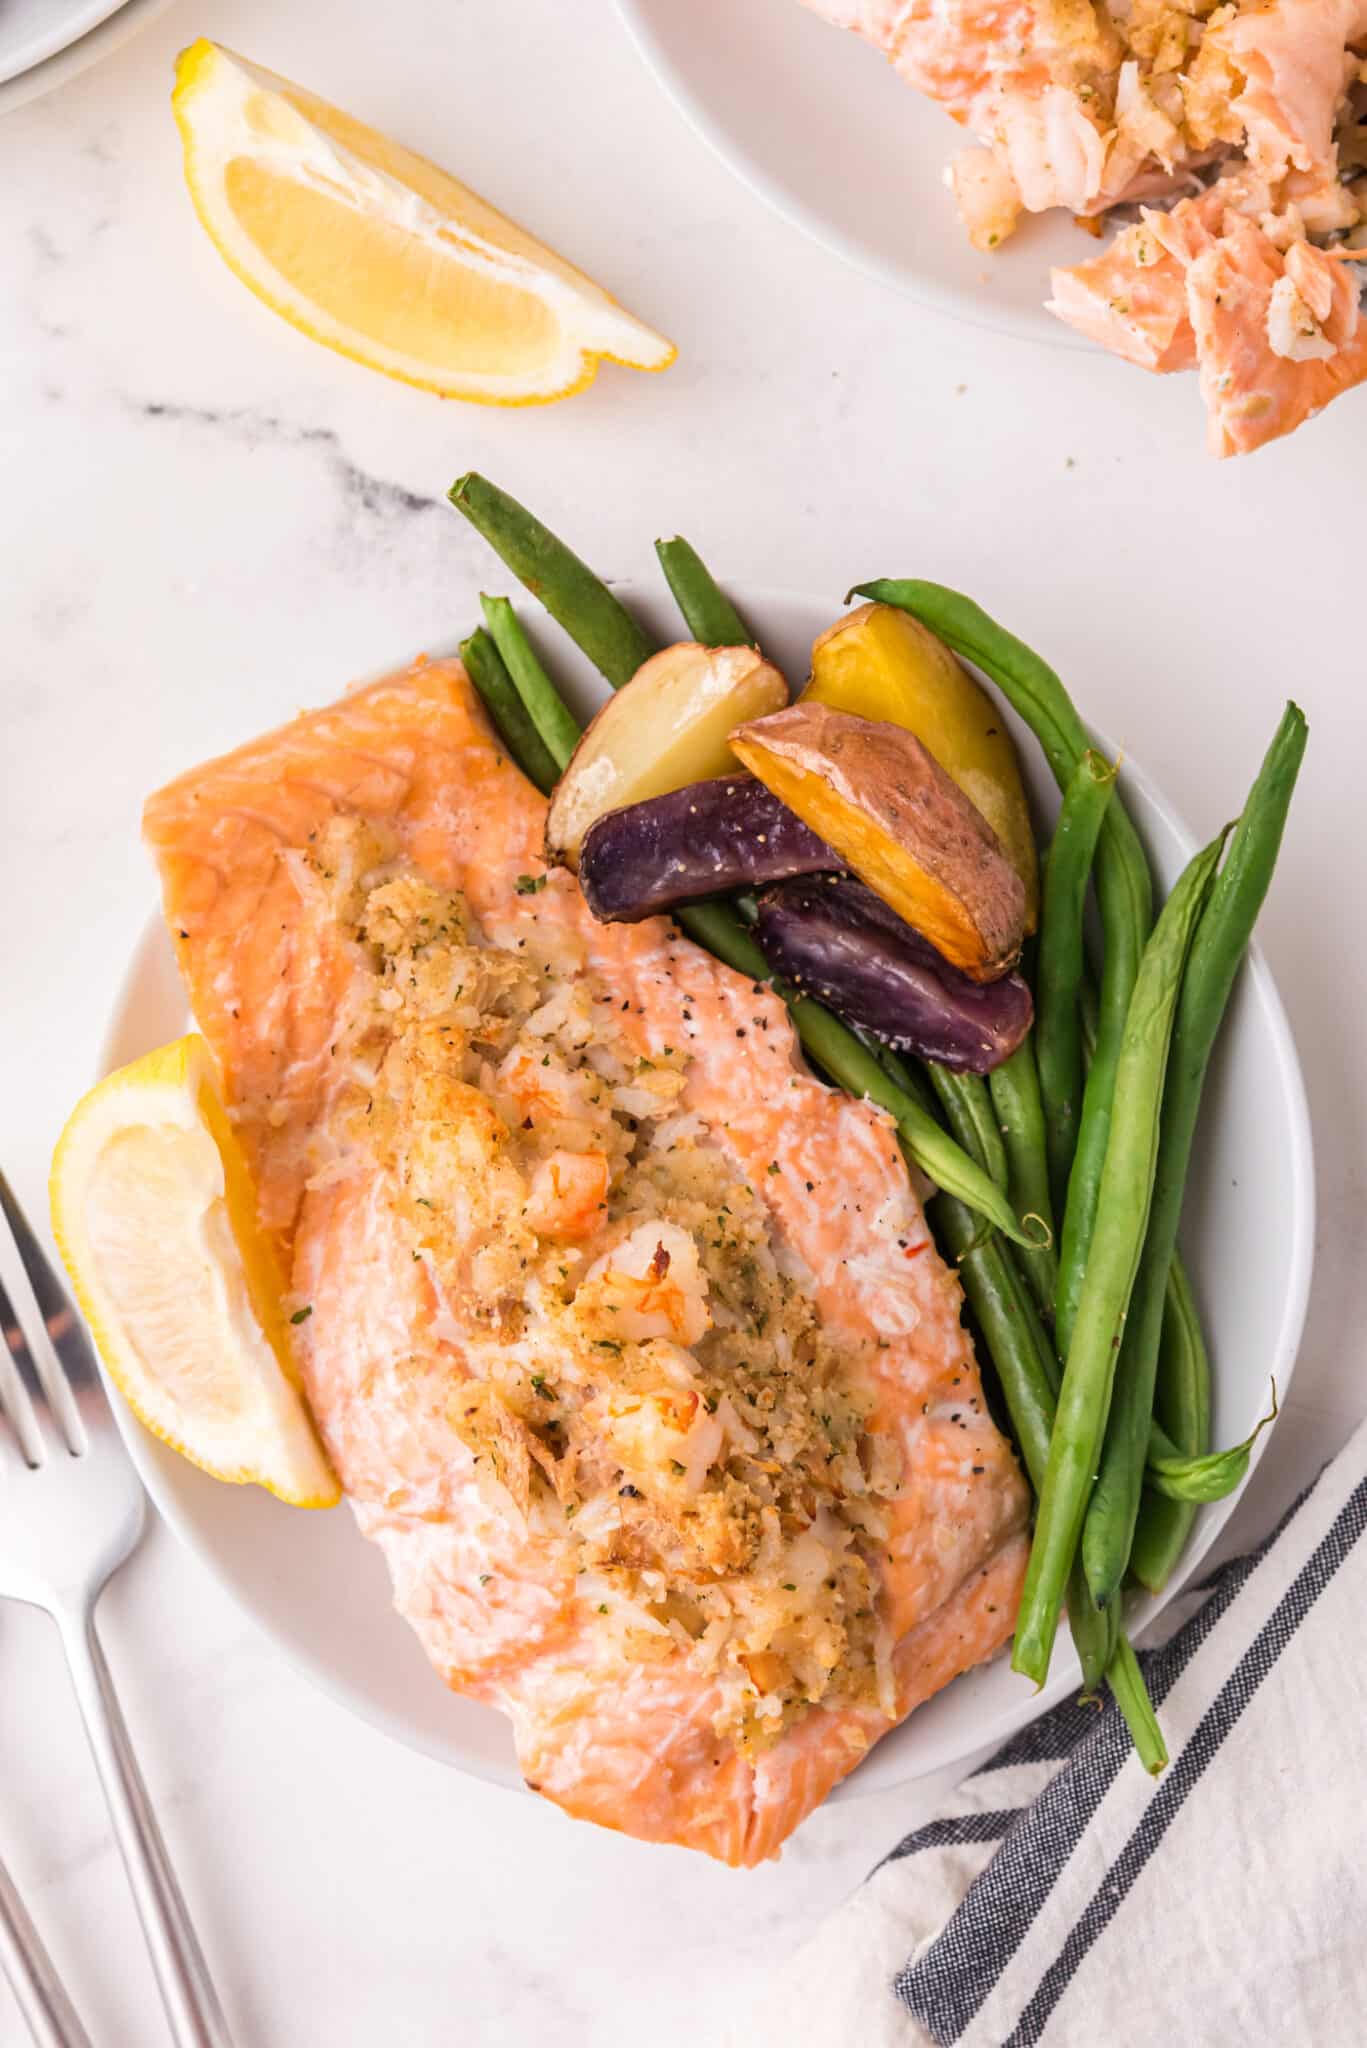 A stuffed salmon filet on a white plate with green beans and potatoes.